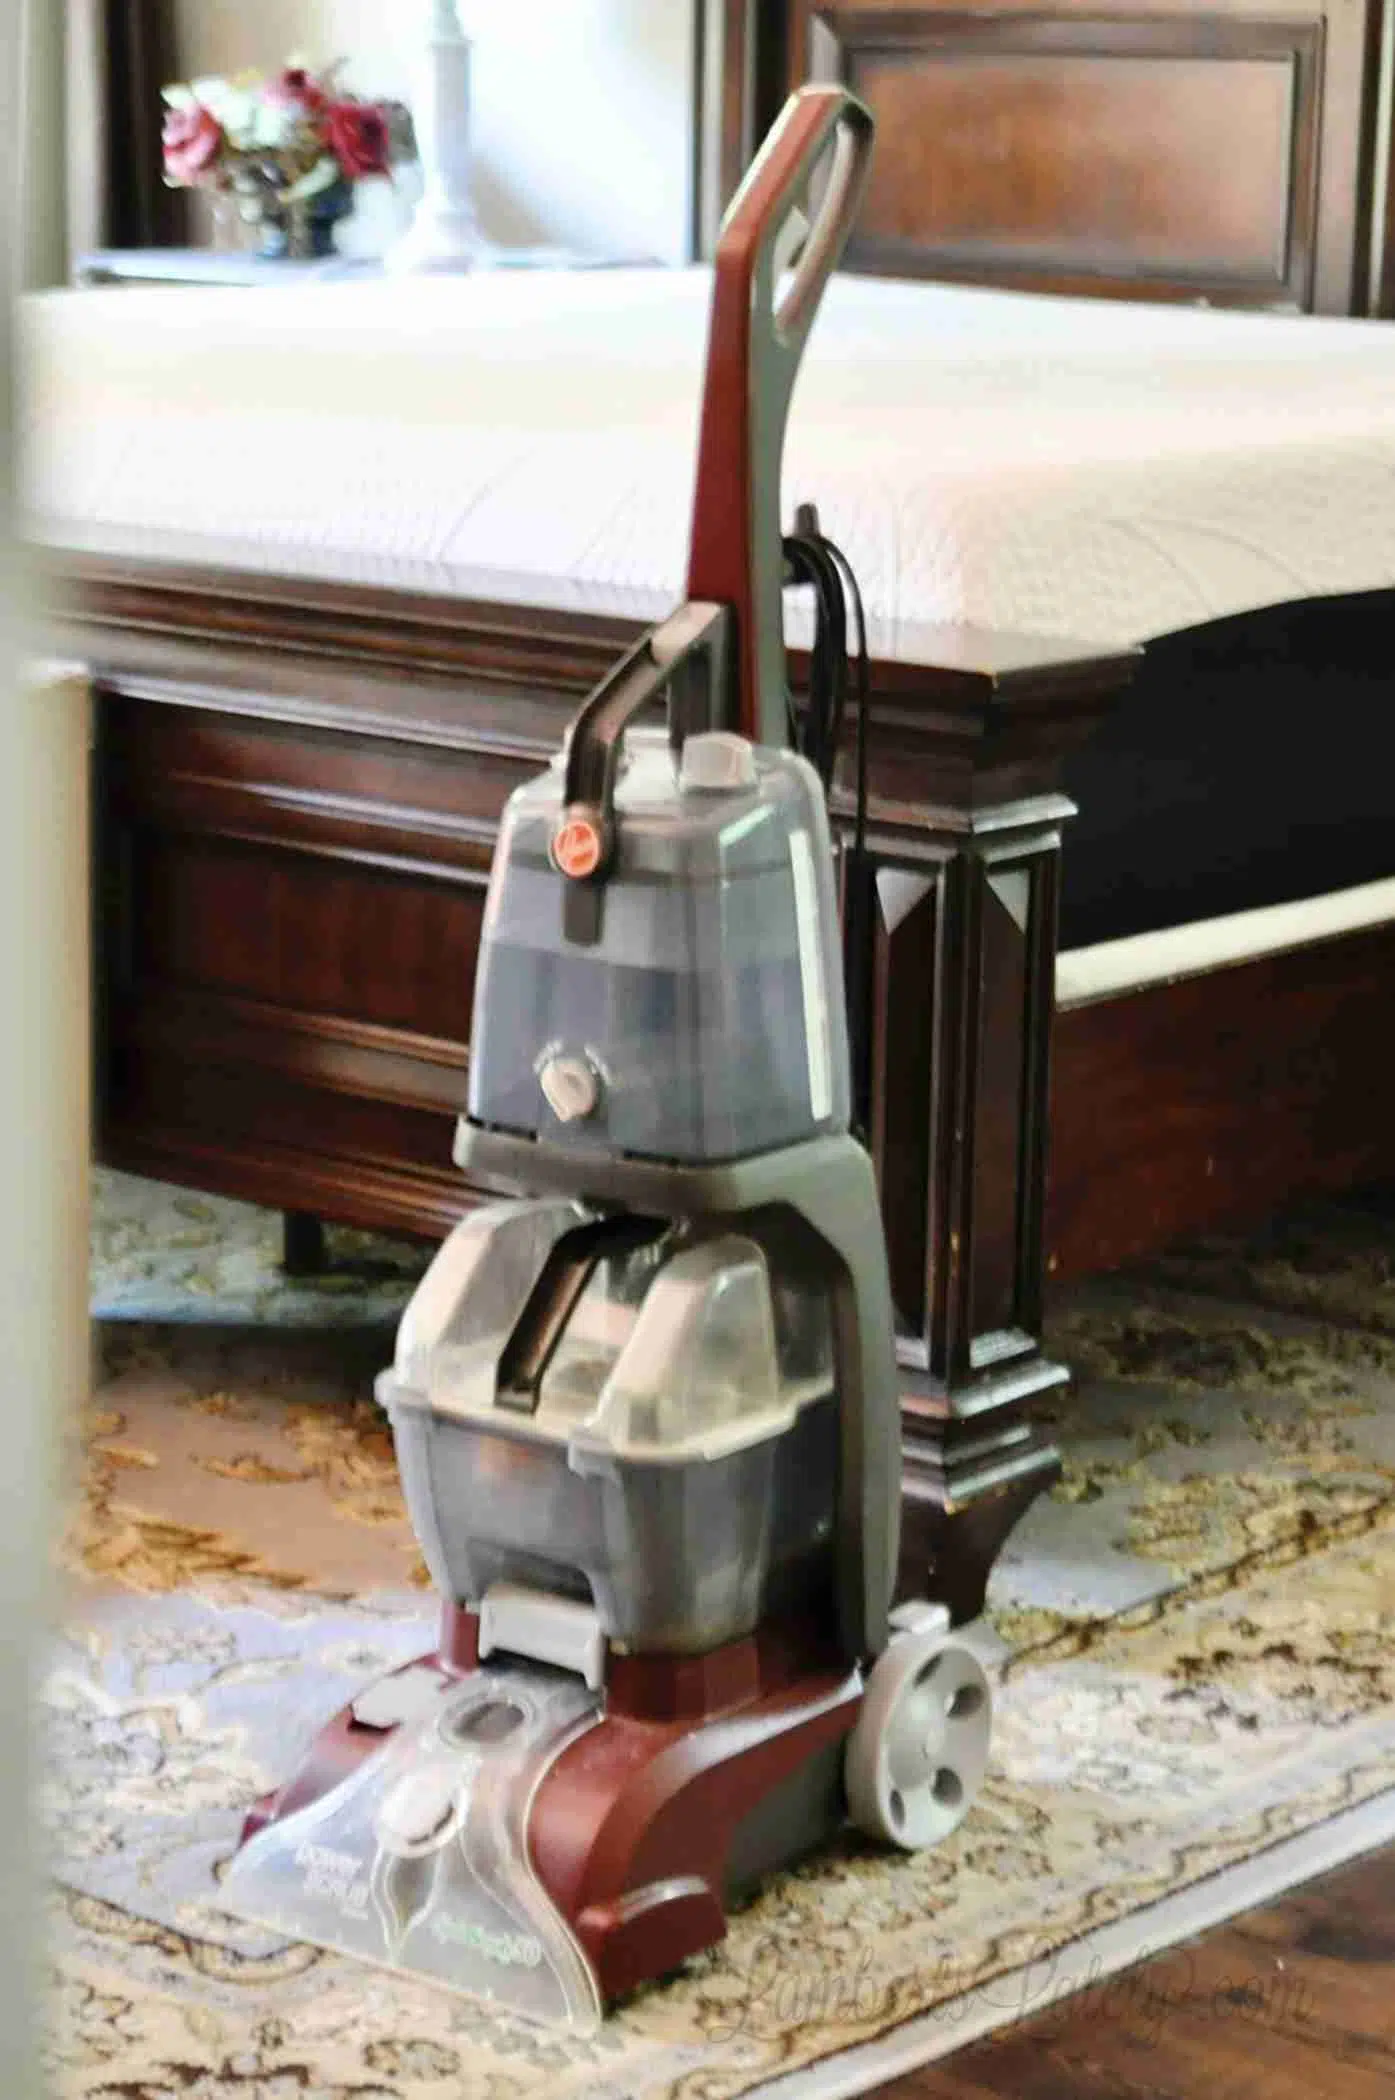 carpet cleaner in front of a bed